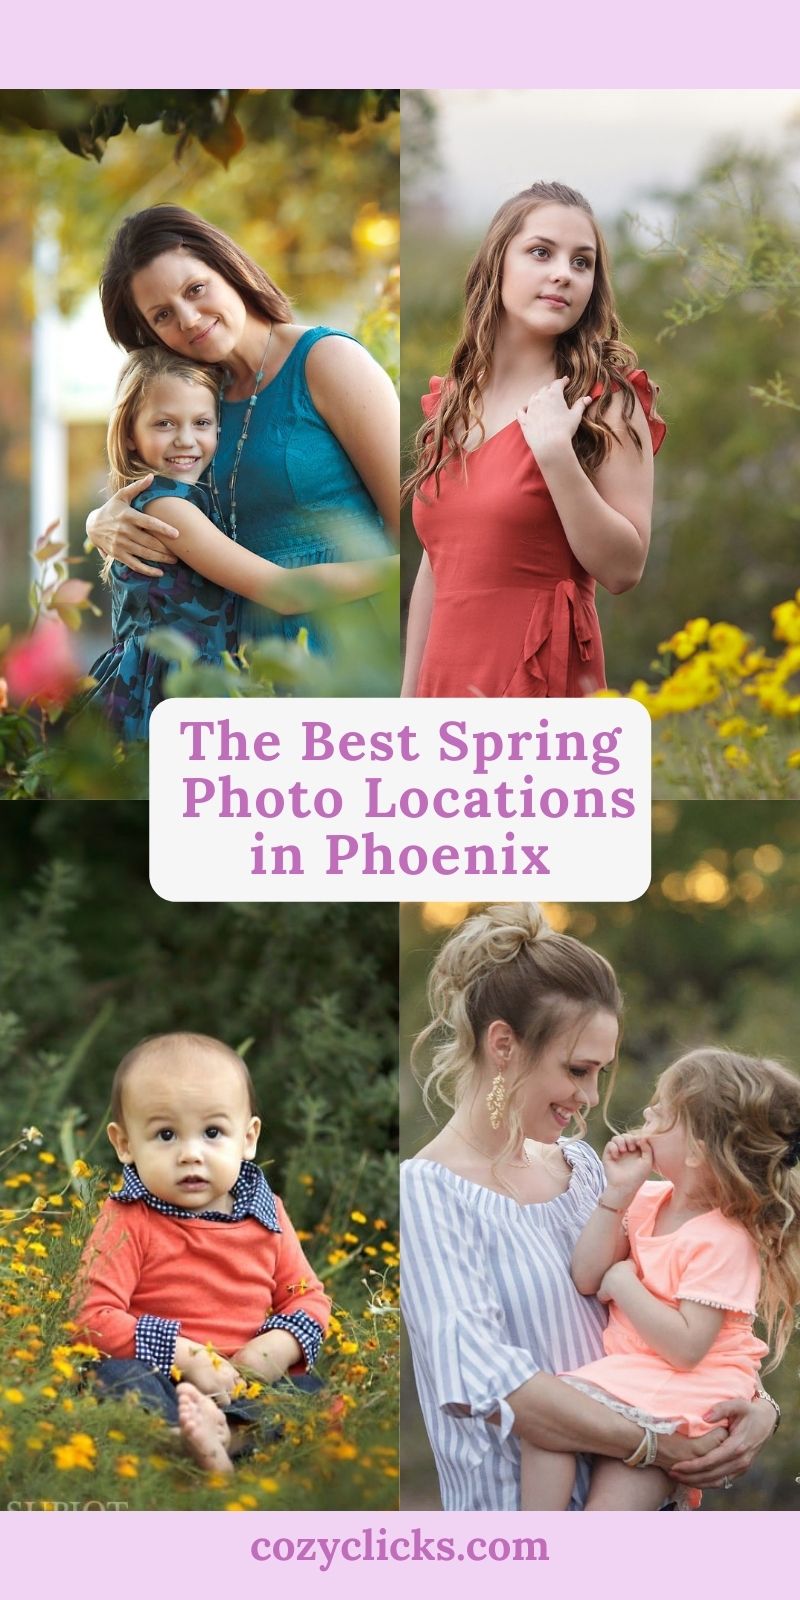 Locations with flowers and green trees in Phoenix Arizona.  Beautiful spring time picture locations.